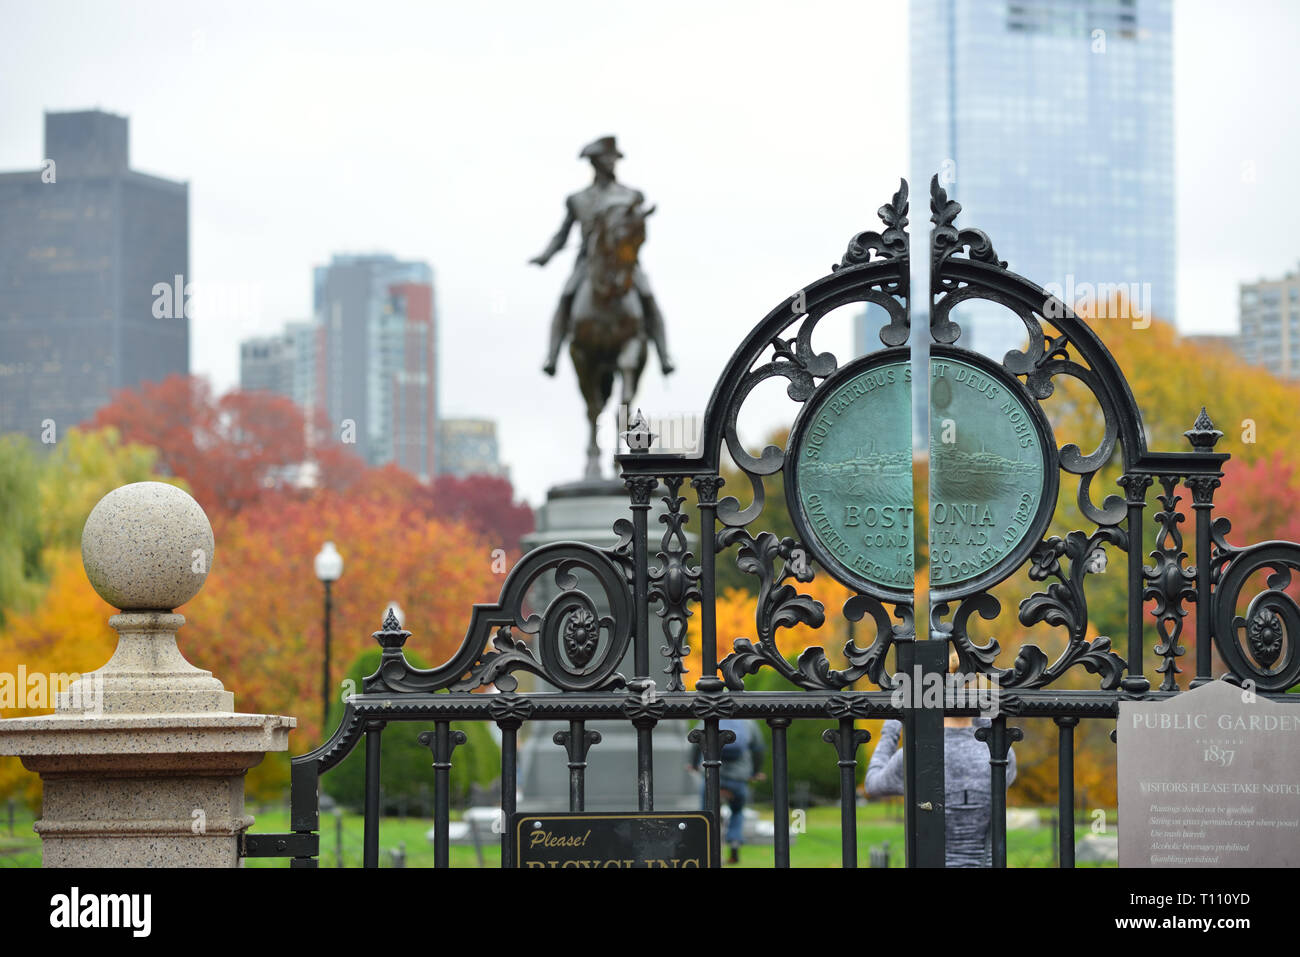 Arlington Gate and Fall Colors in Boston Public Garden. George Washington statue and city skyline in the background. Stock Photo